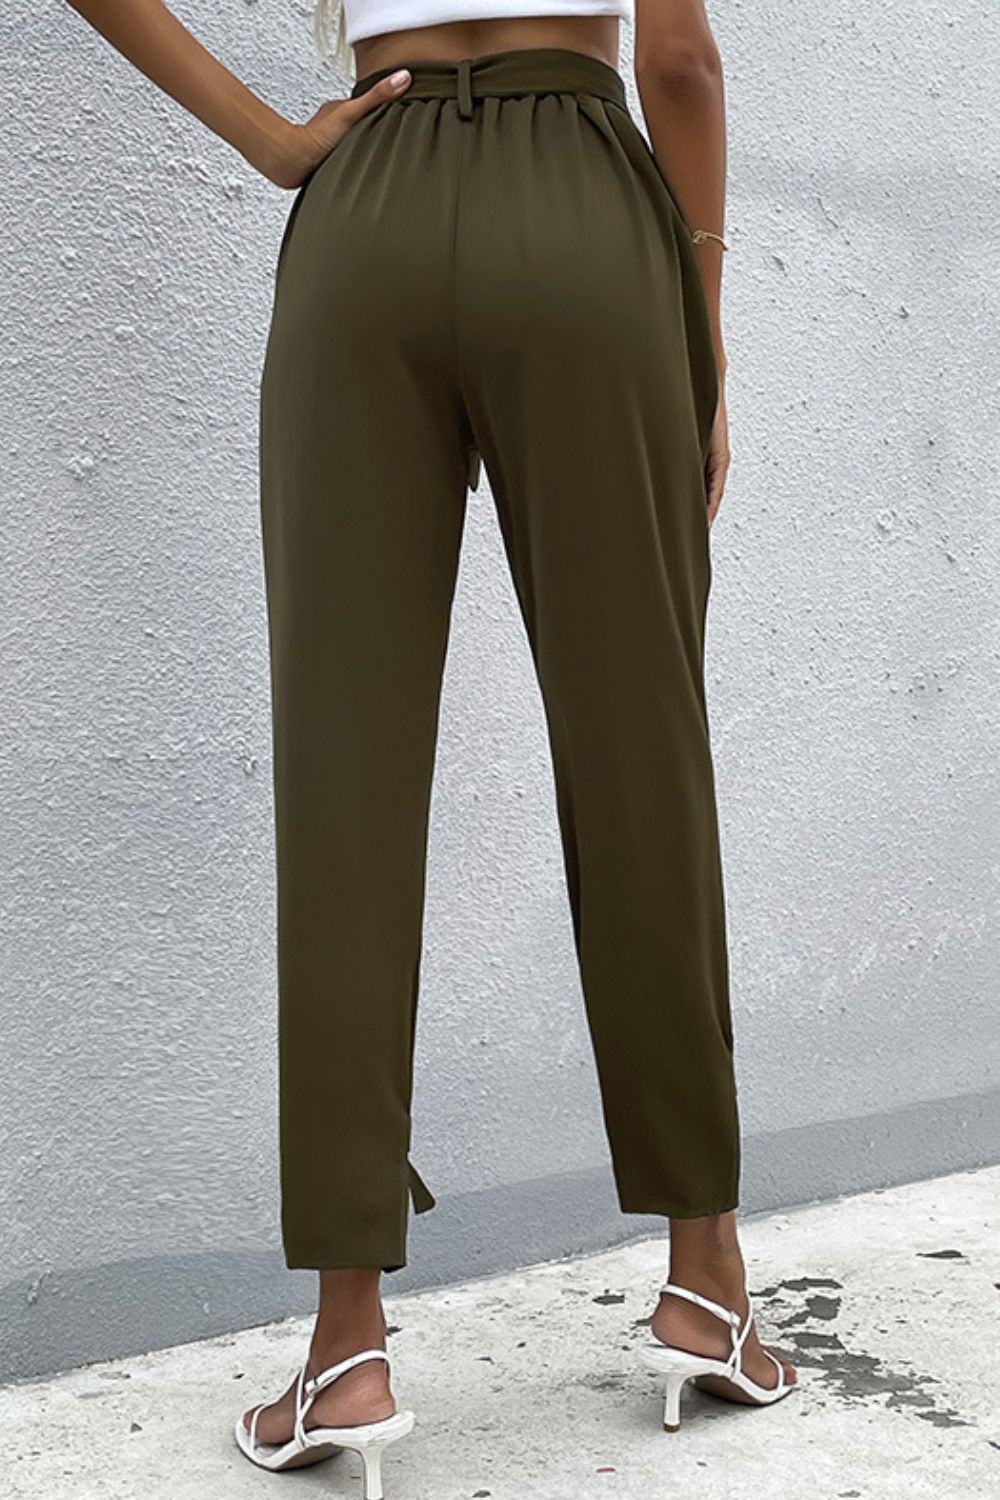 Tie Detail Belted Pants with Pockets